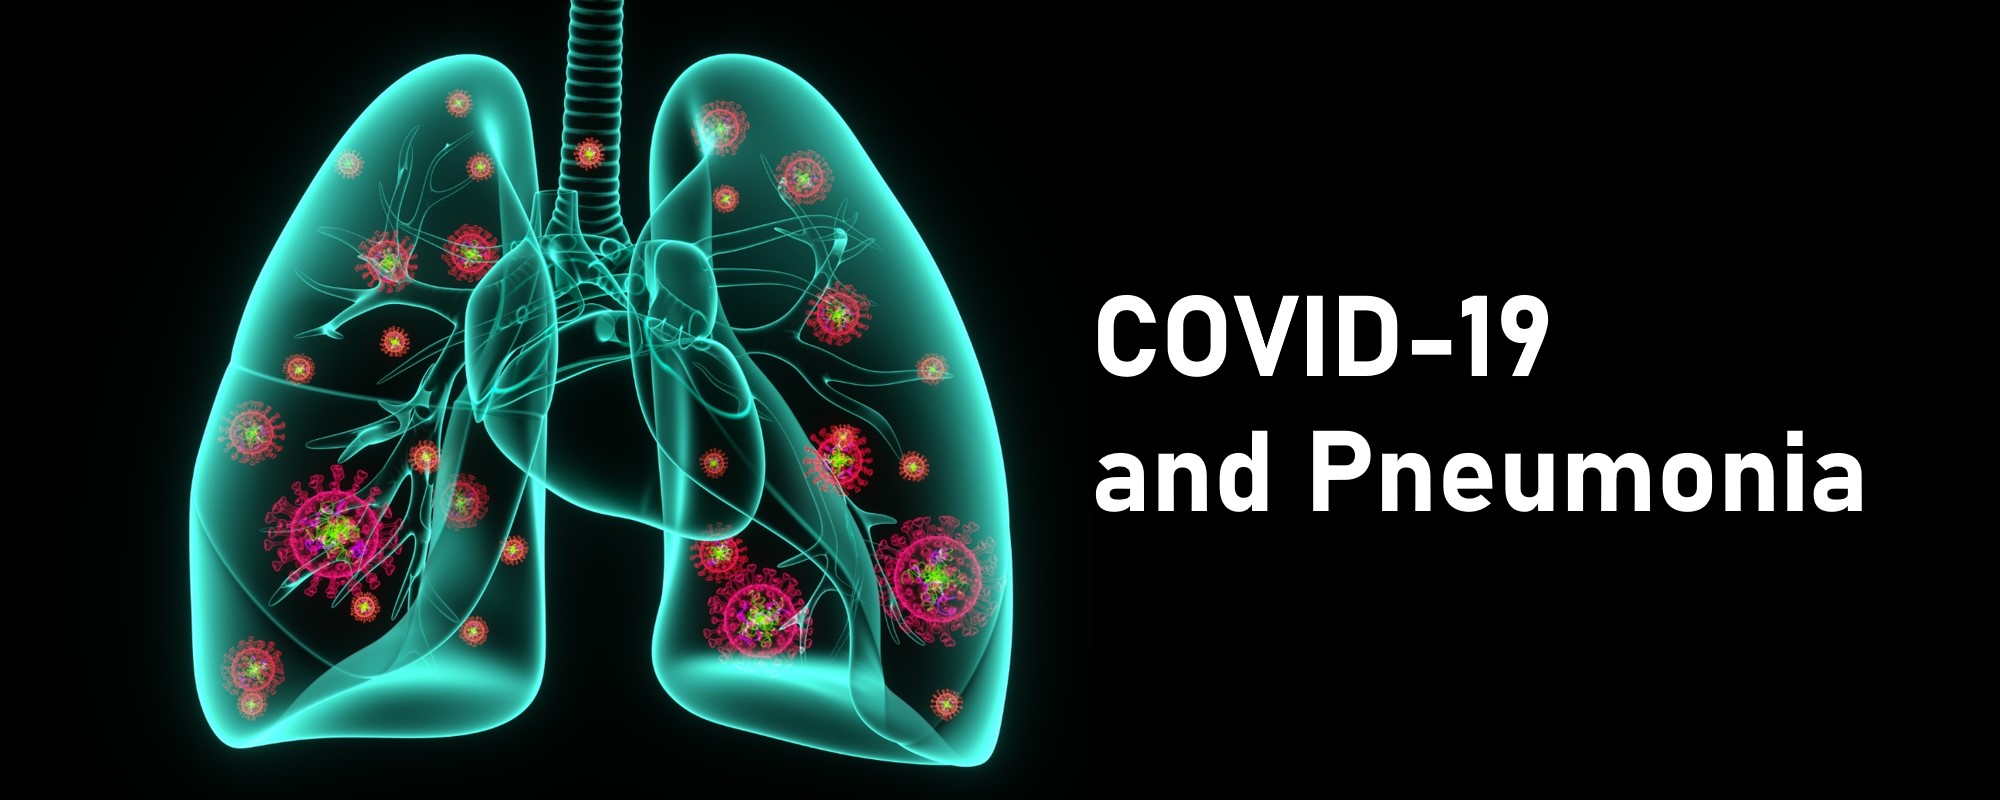 COVID-19 and Pneumonia – What is the Relation?